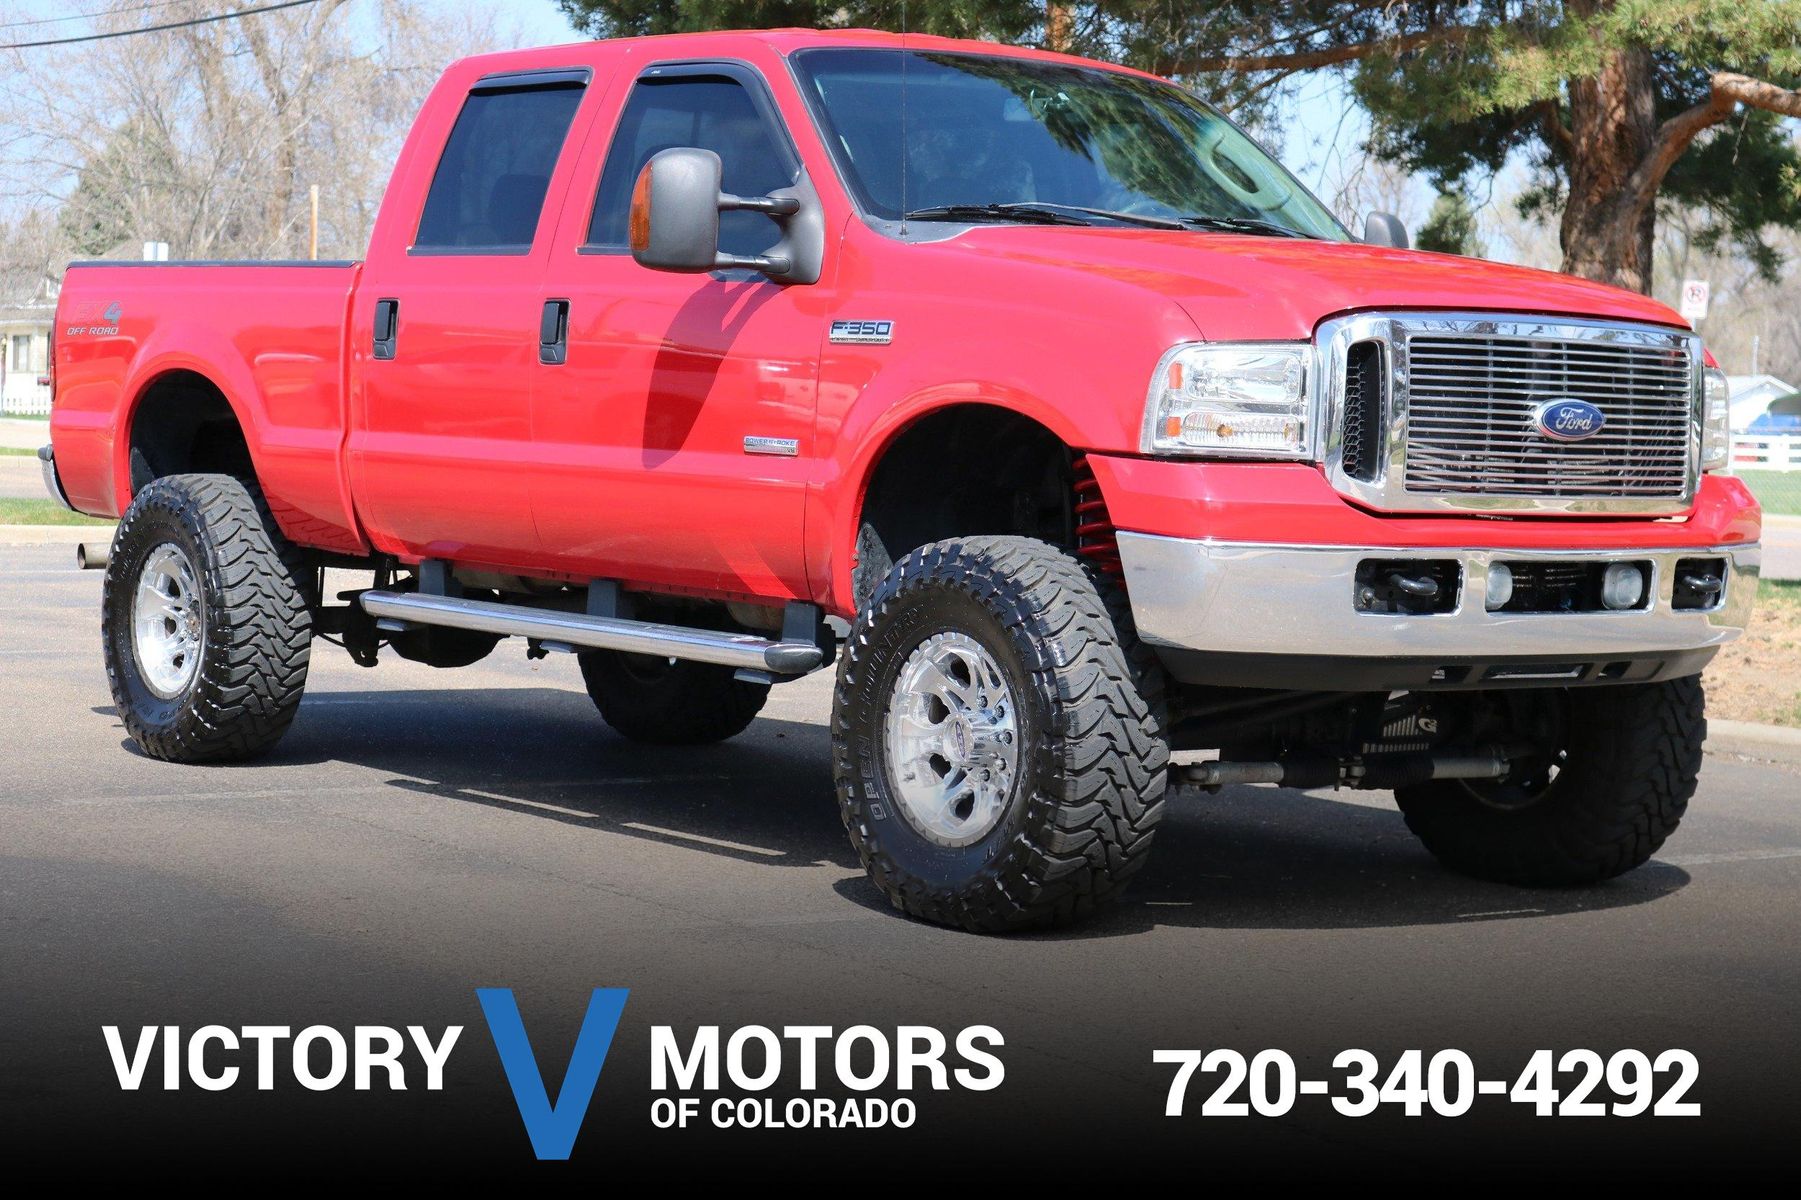 2006 Ford F-350 Super Duty Lariat | Victory Motors of Colorado 2006 Ford F350 Abs Light Stays On